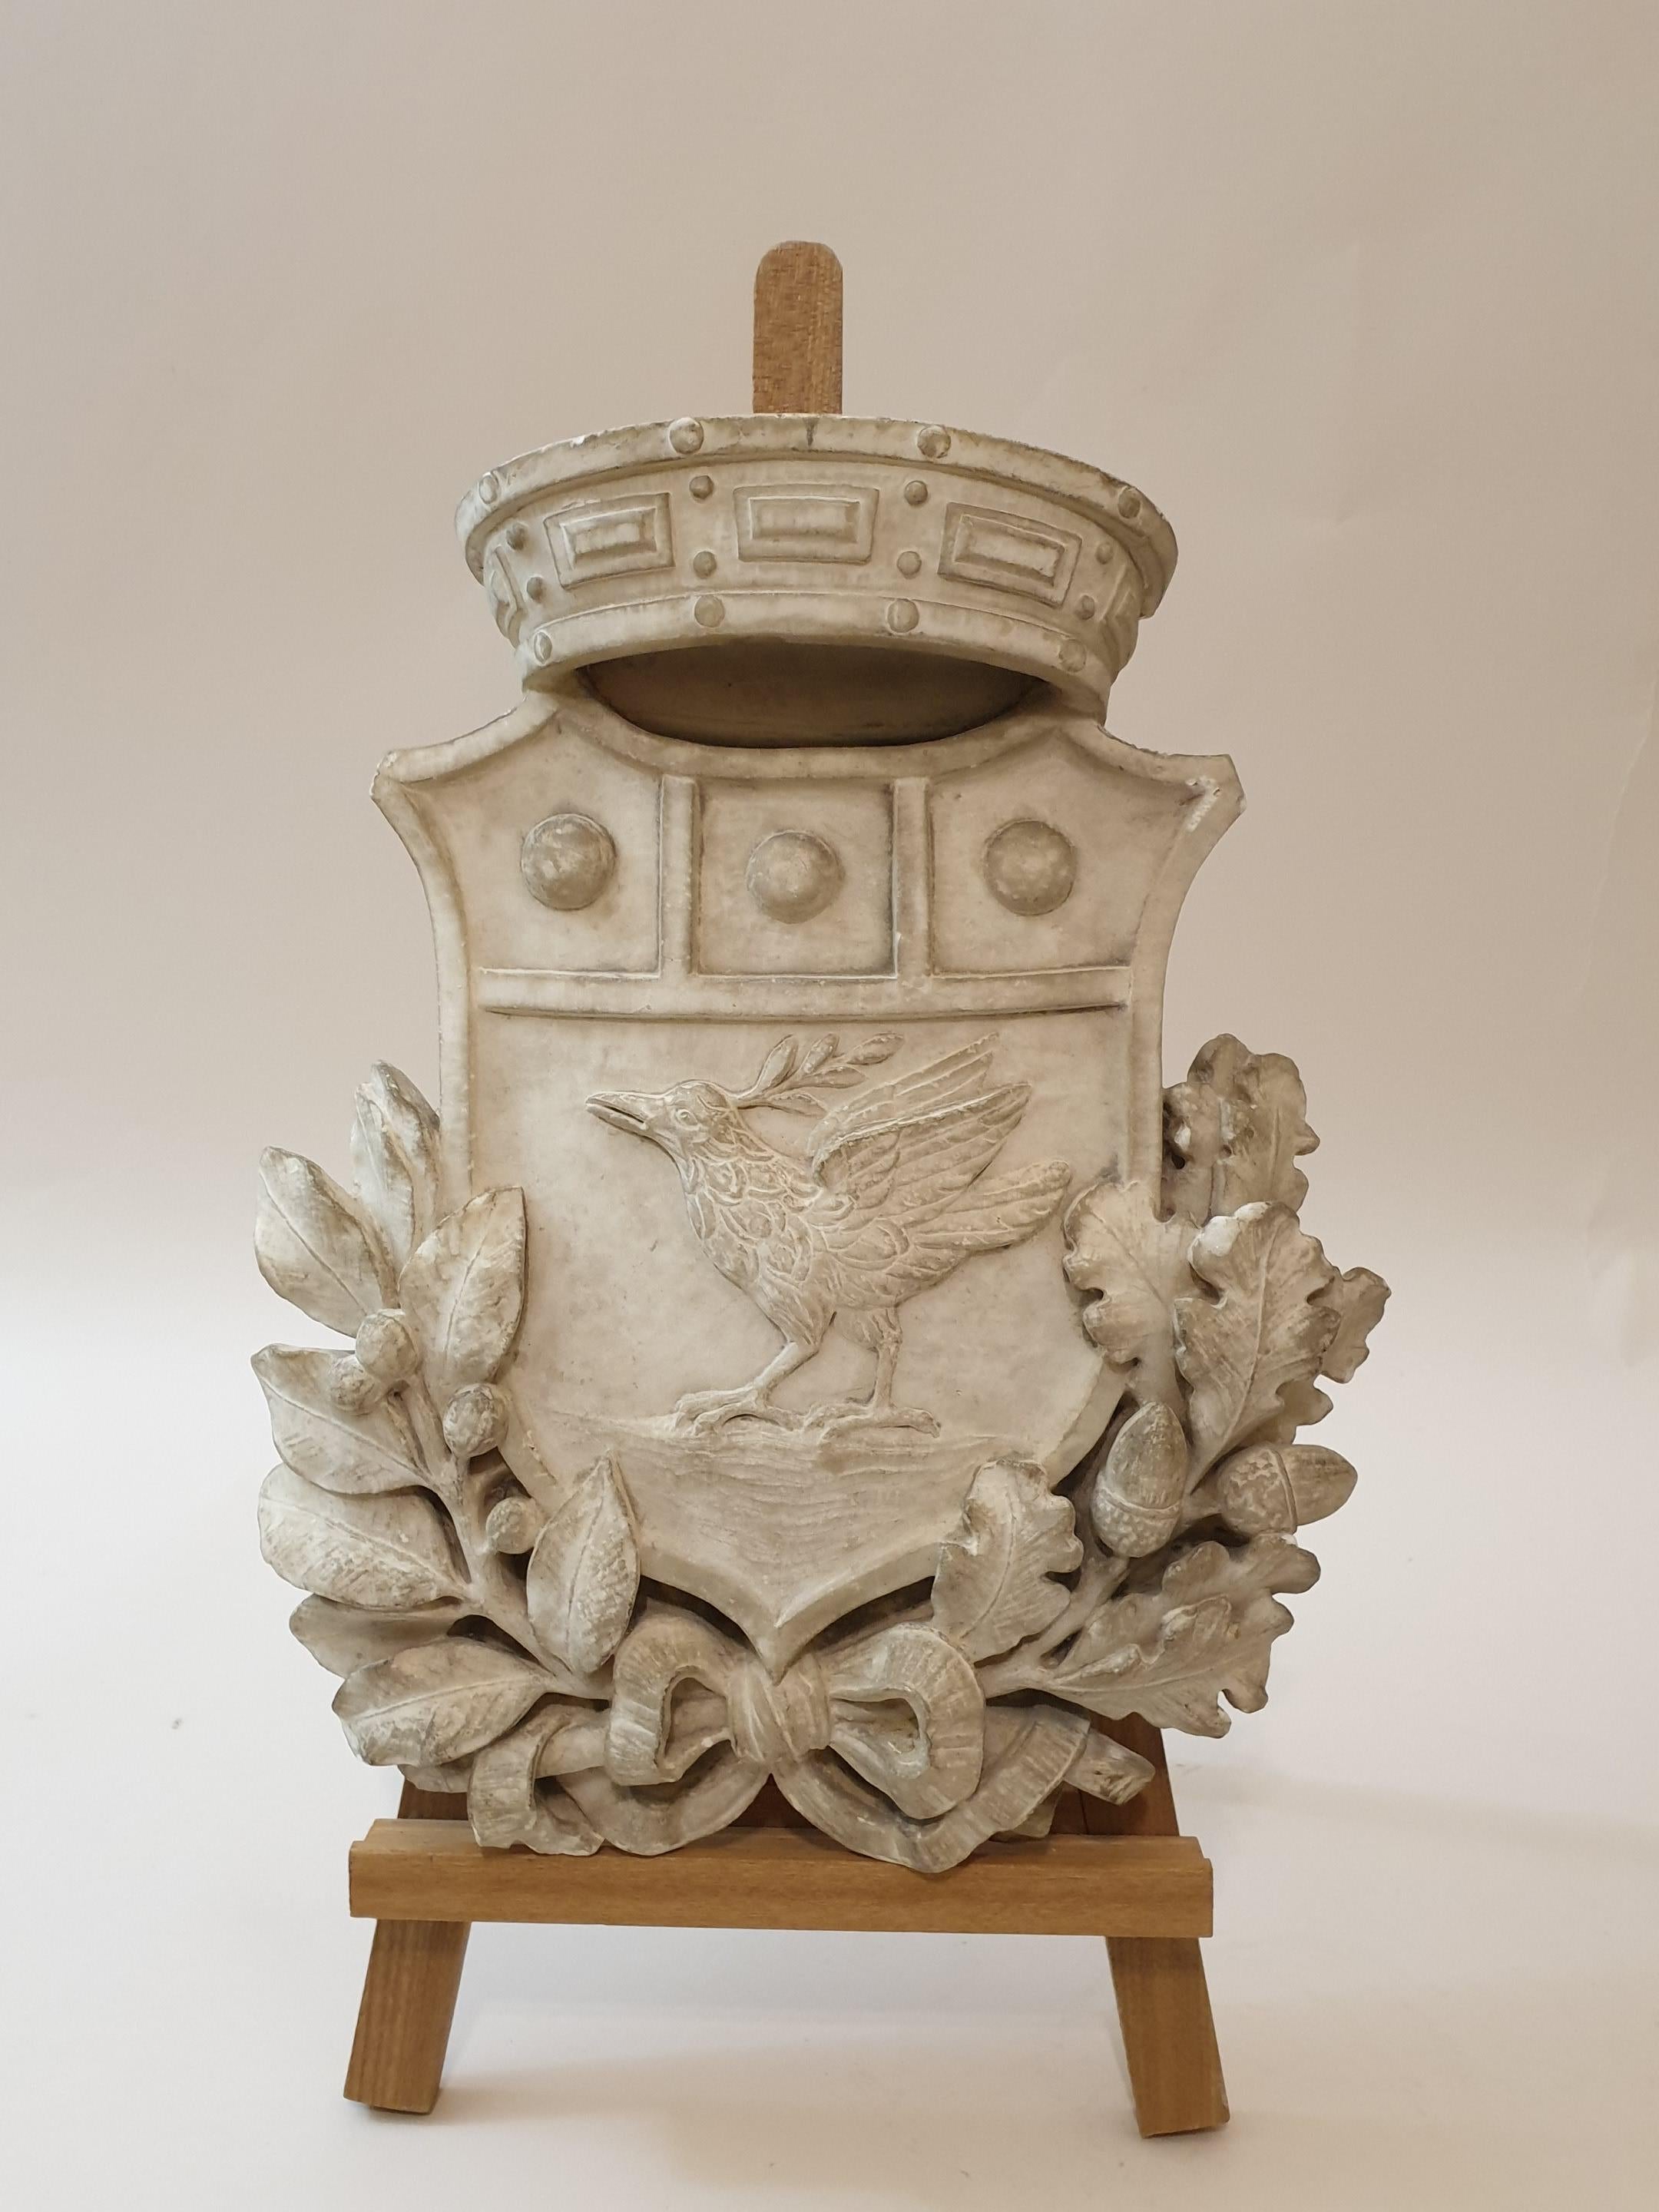 A heraldic coat of arms in white marble finely carved in bas-relief depicting a dove with an olive tree, inside a shield with crown over it and lower leaves of laurel and oak.